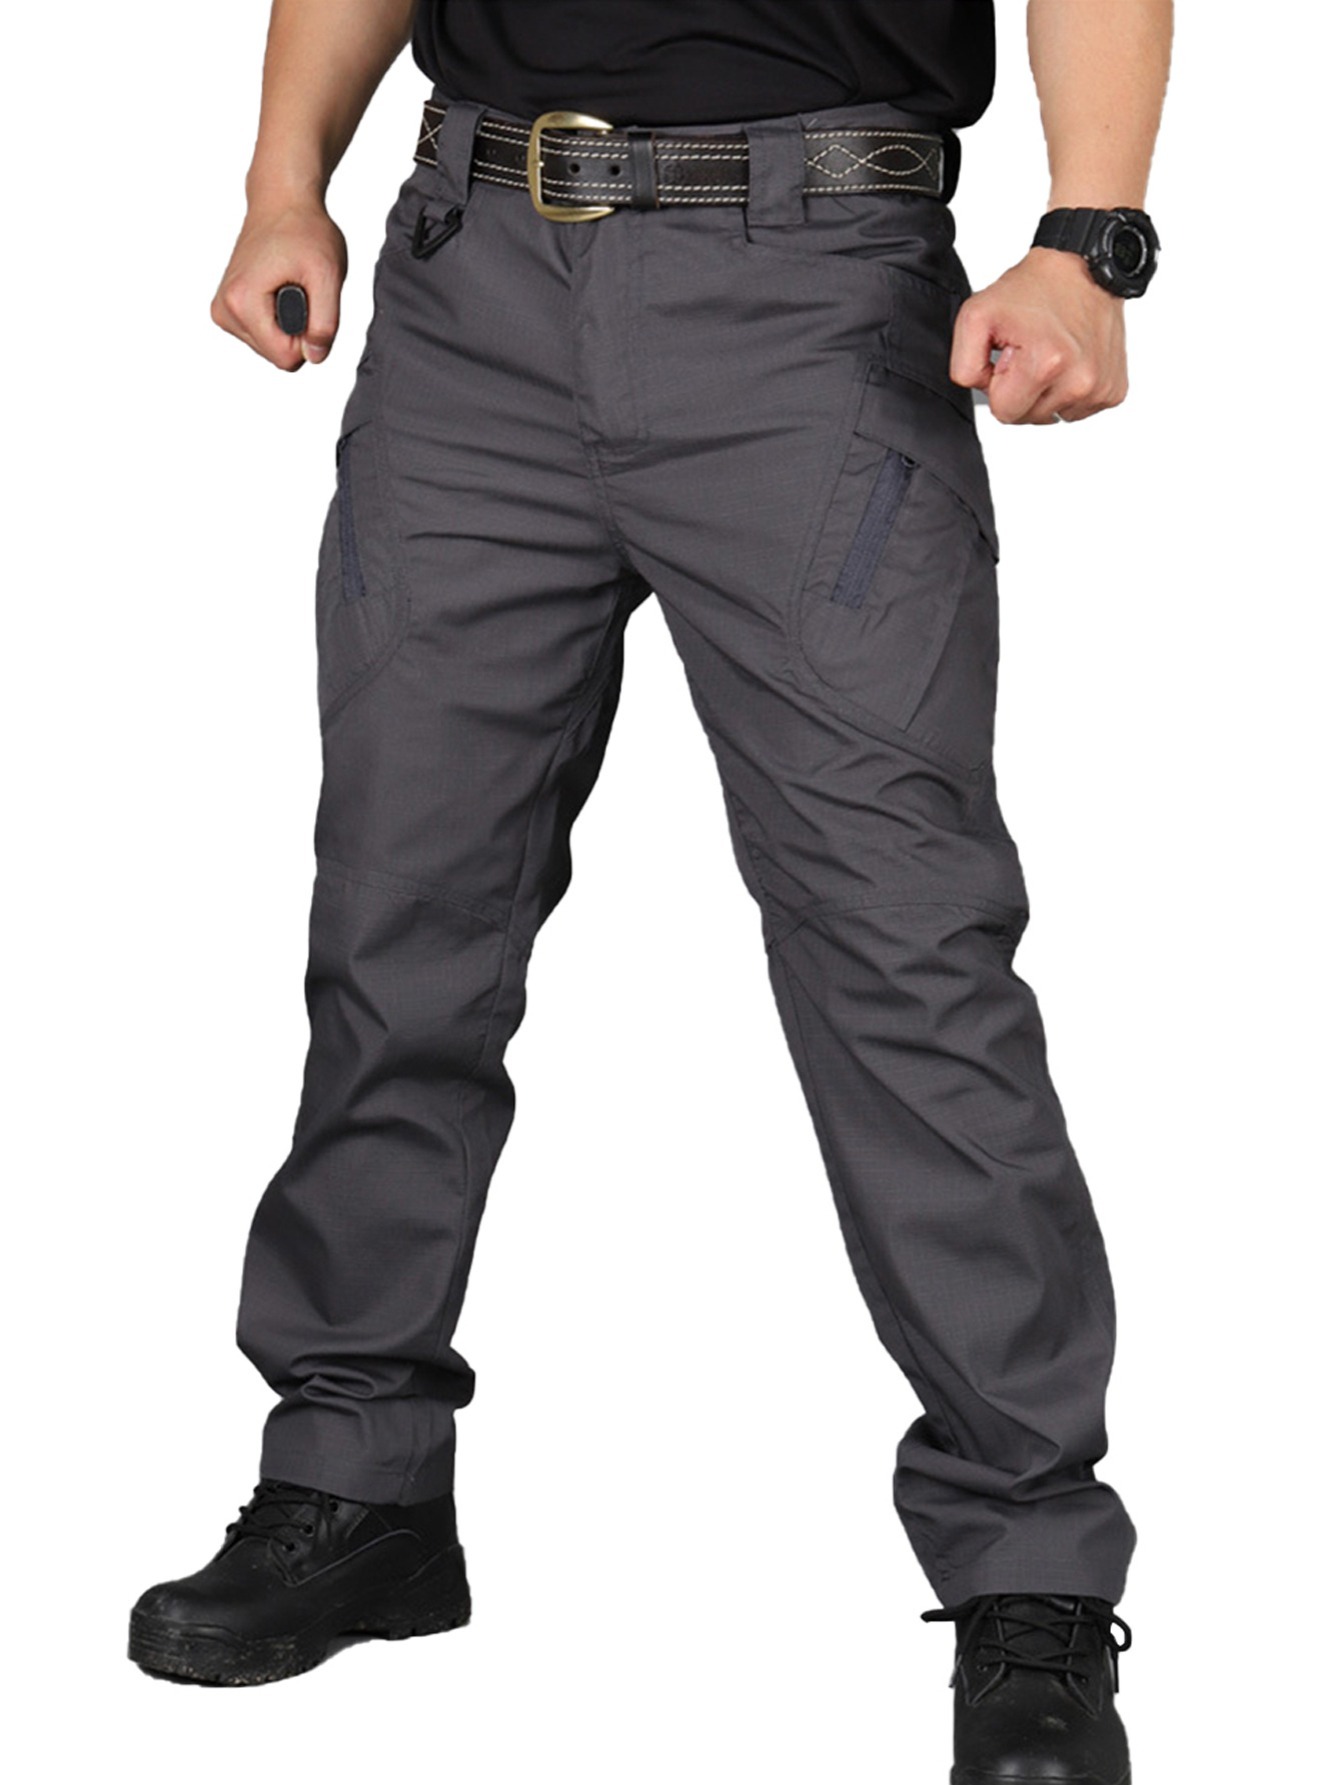 Zip Up Multi Pocket Solid Sports Pants, Sweatpants, Men's Non-Stretch Waterproof Lightweight Hiking Work Multi Pockets Cargo Pants With,Temu